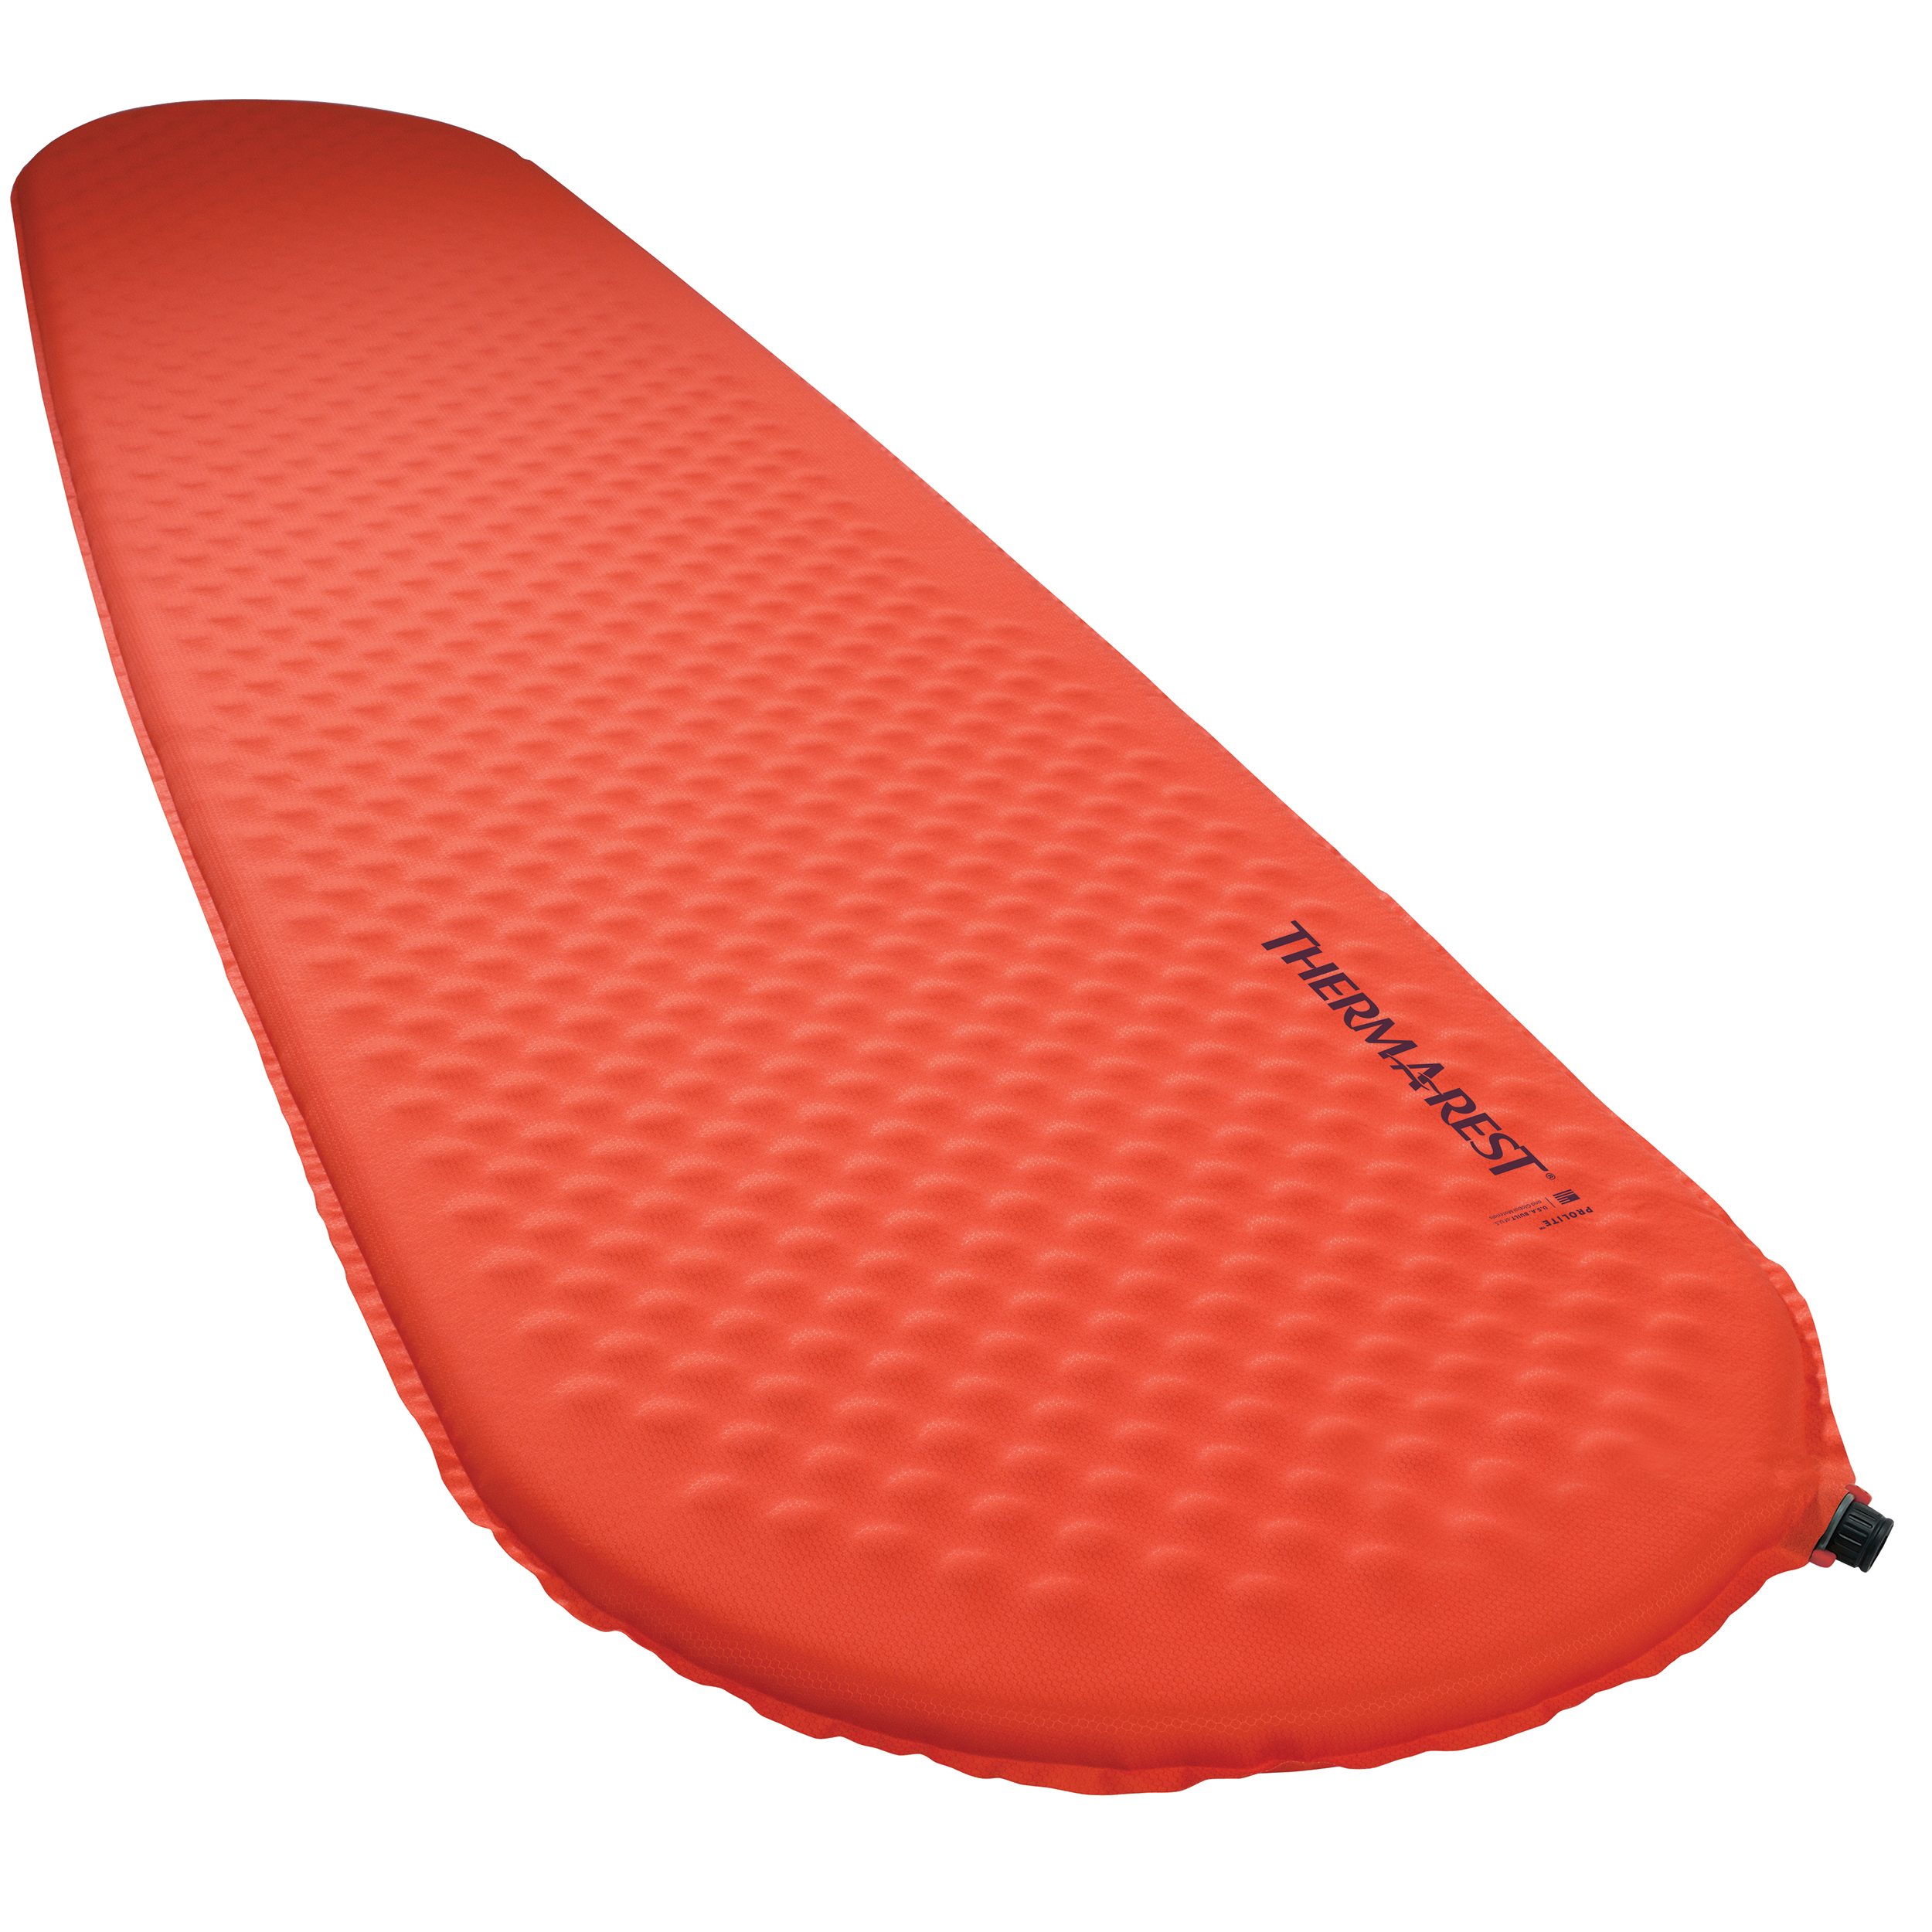 George Eliot Ultieme Opera ProLite™ Self-Inflating Compact Sleeping Pad | Therm-a-Rest®